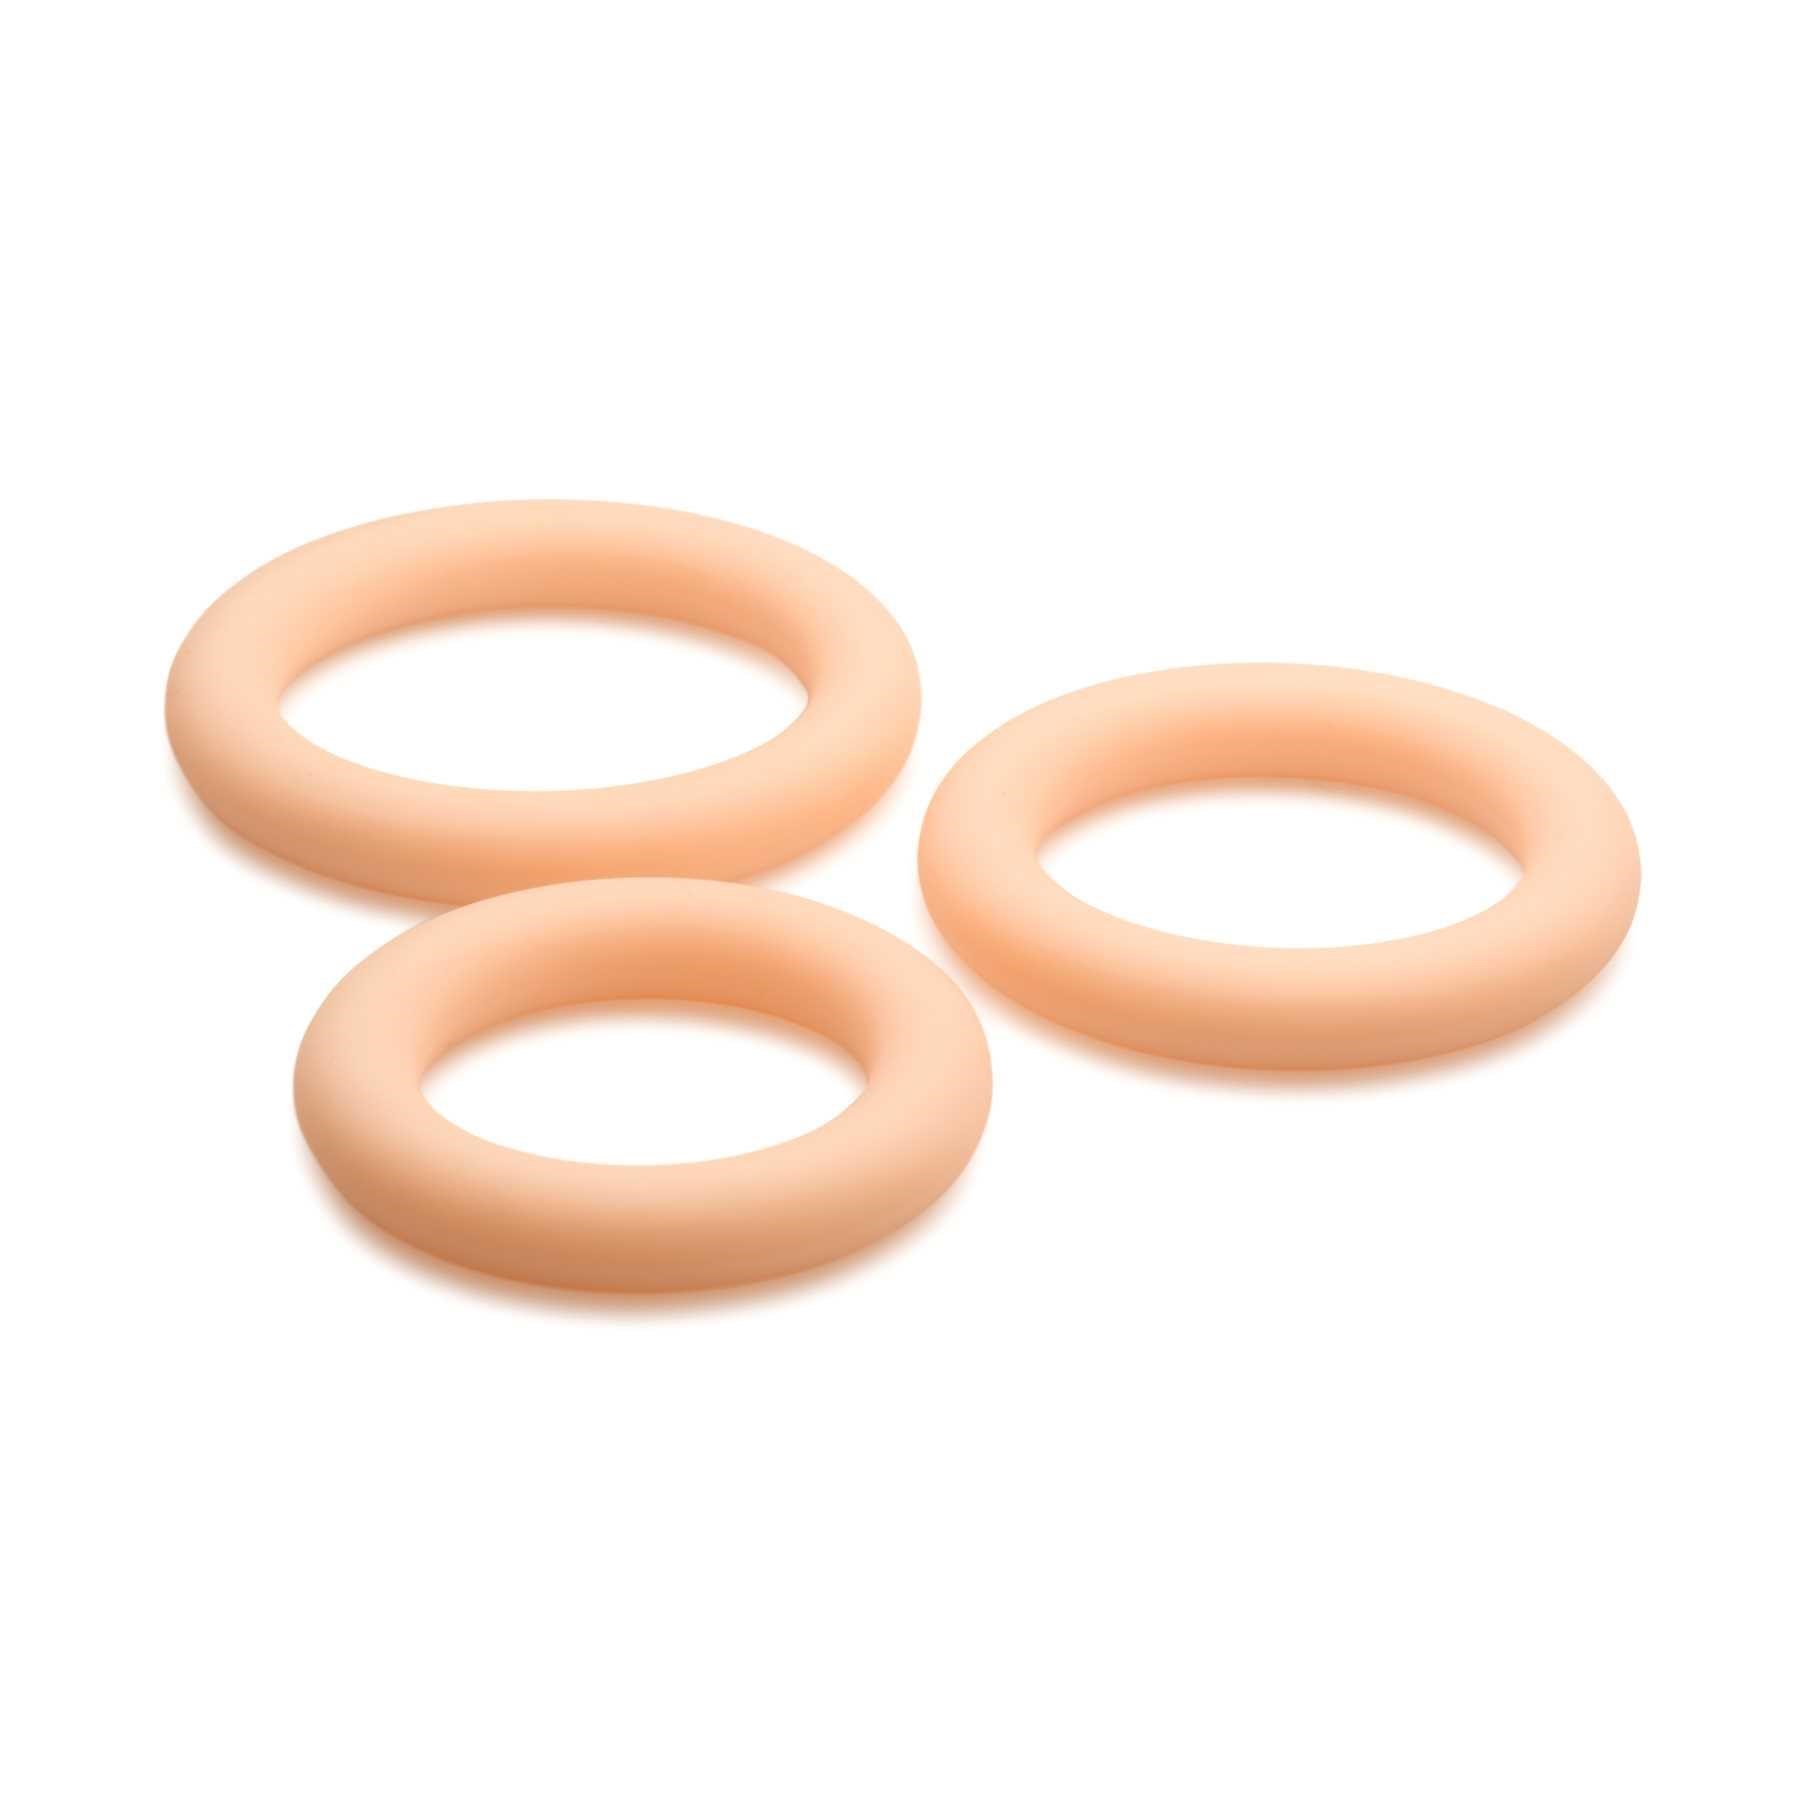 Jock Silicone Cock Ring Set white 3 rings on table